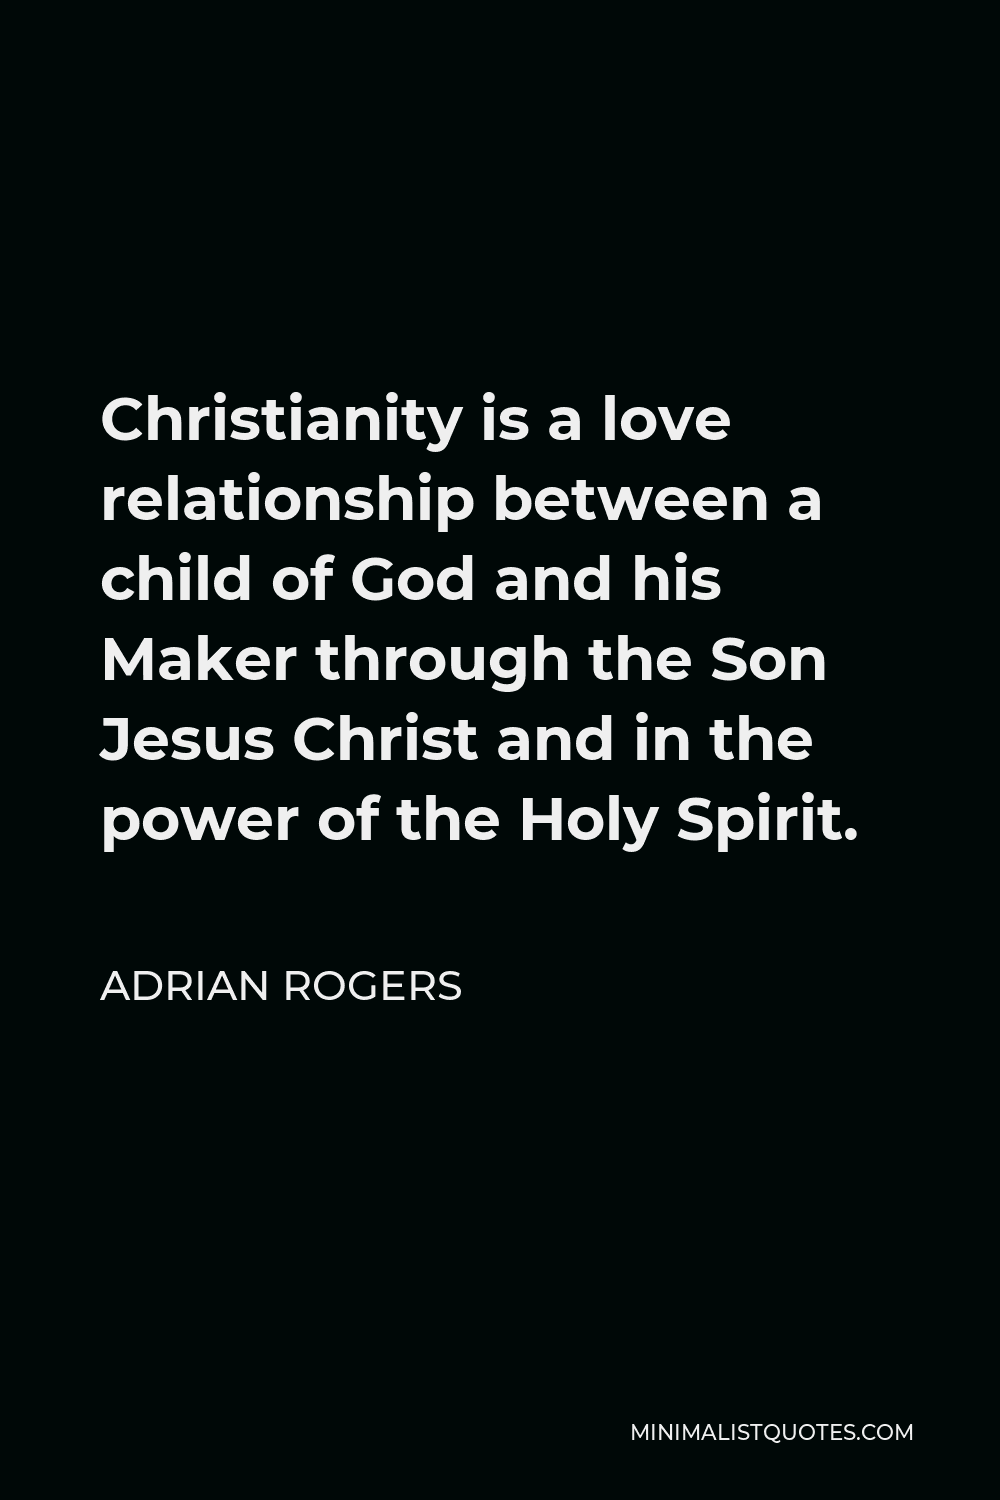 Adrian Rogers Quote - Christianity is a love relationship between a child of God and his Maker through the Son Jesus Christ and in the power of the Holy Spirit.